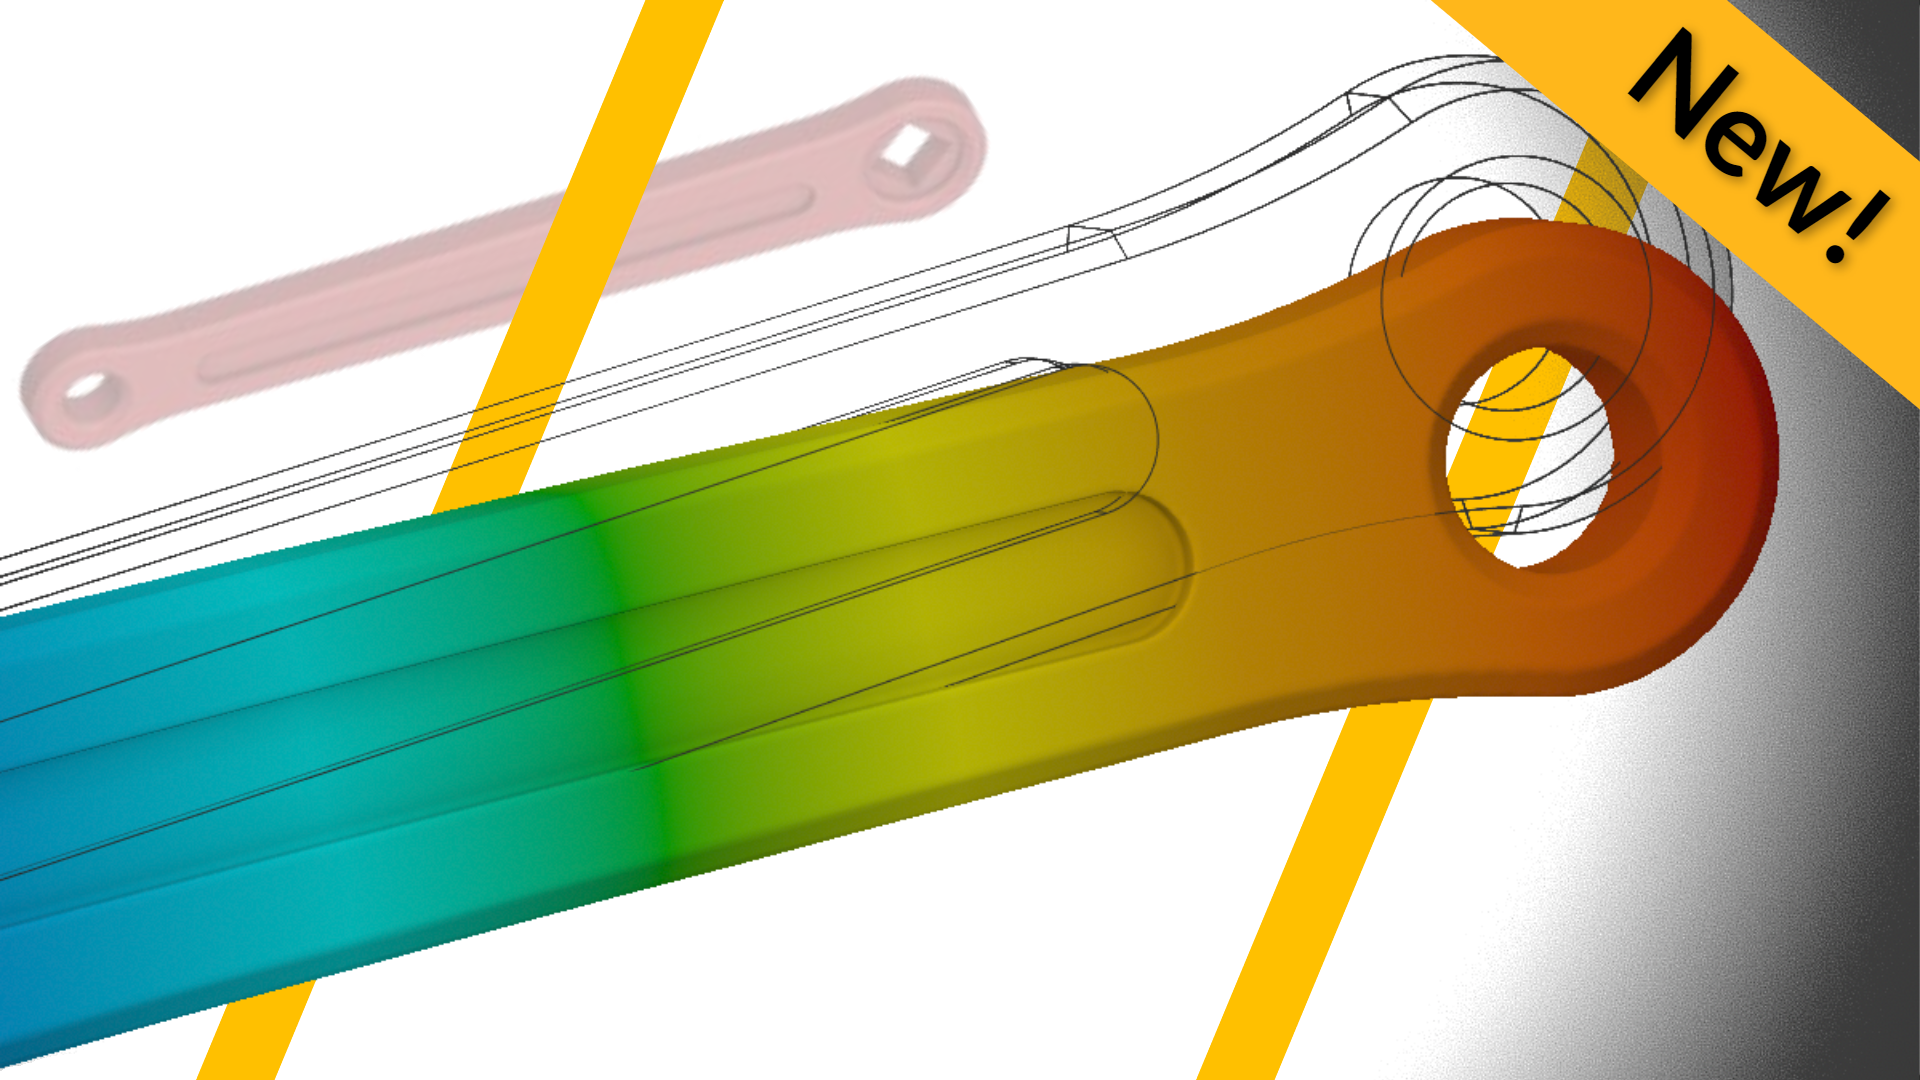 Bike Crank Design Tutorial with Ansys Discovery — Breakaway!